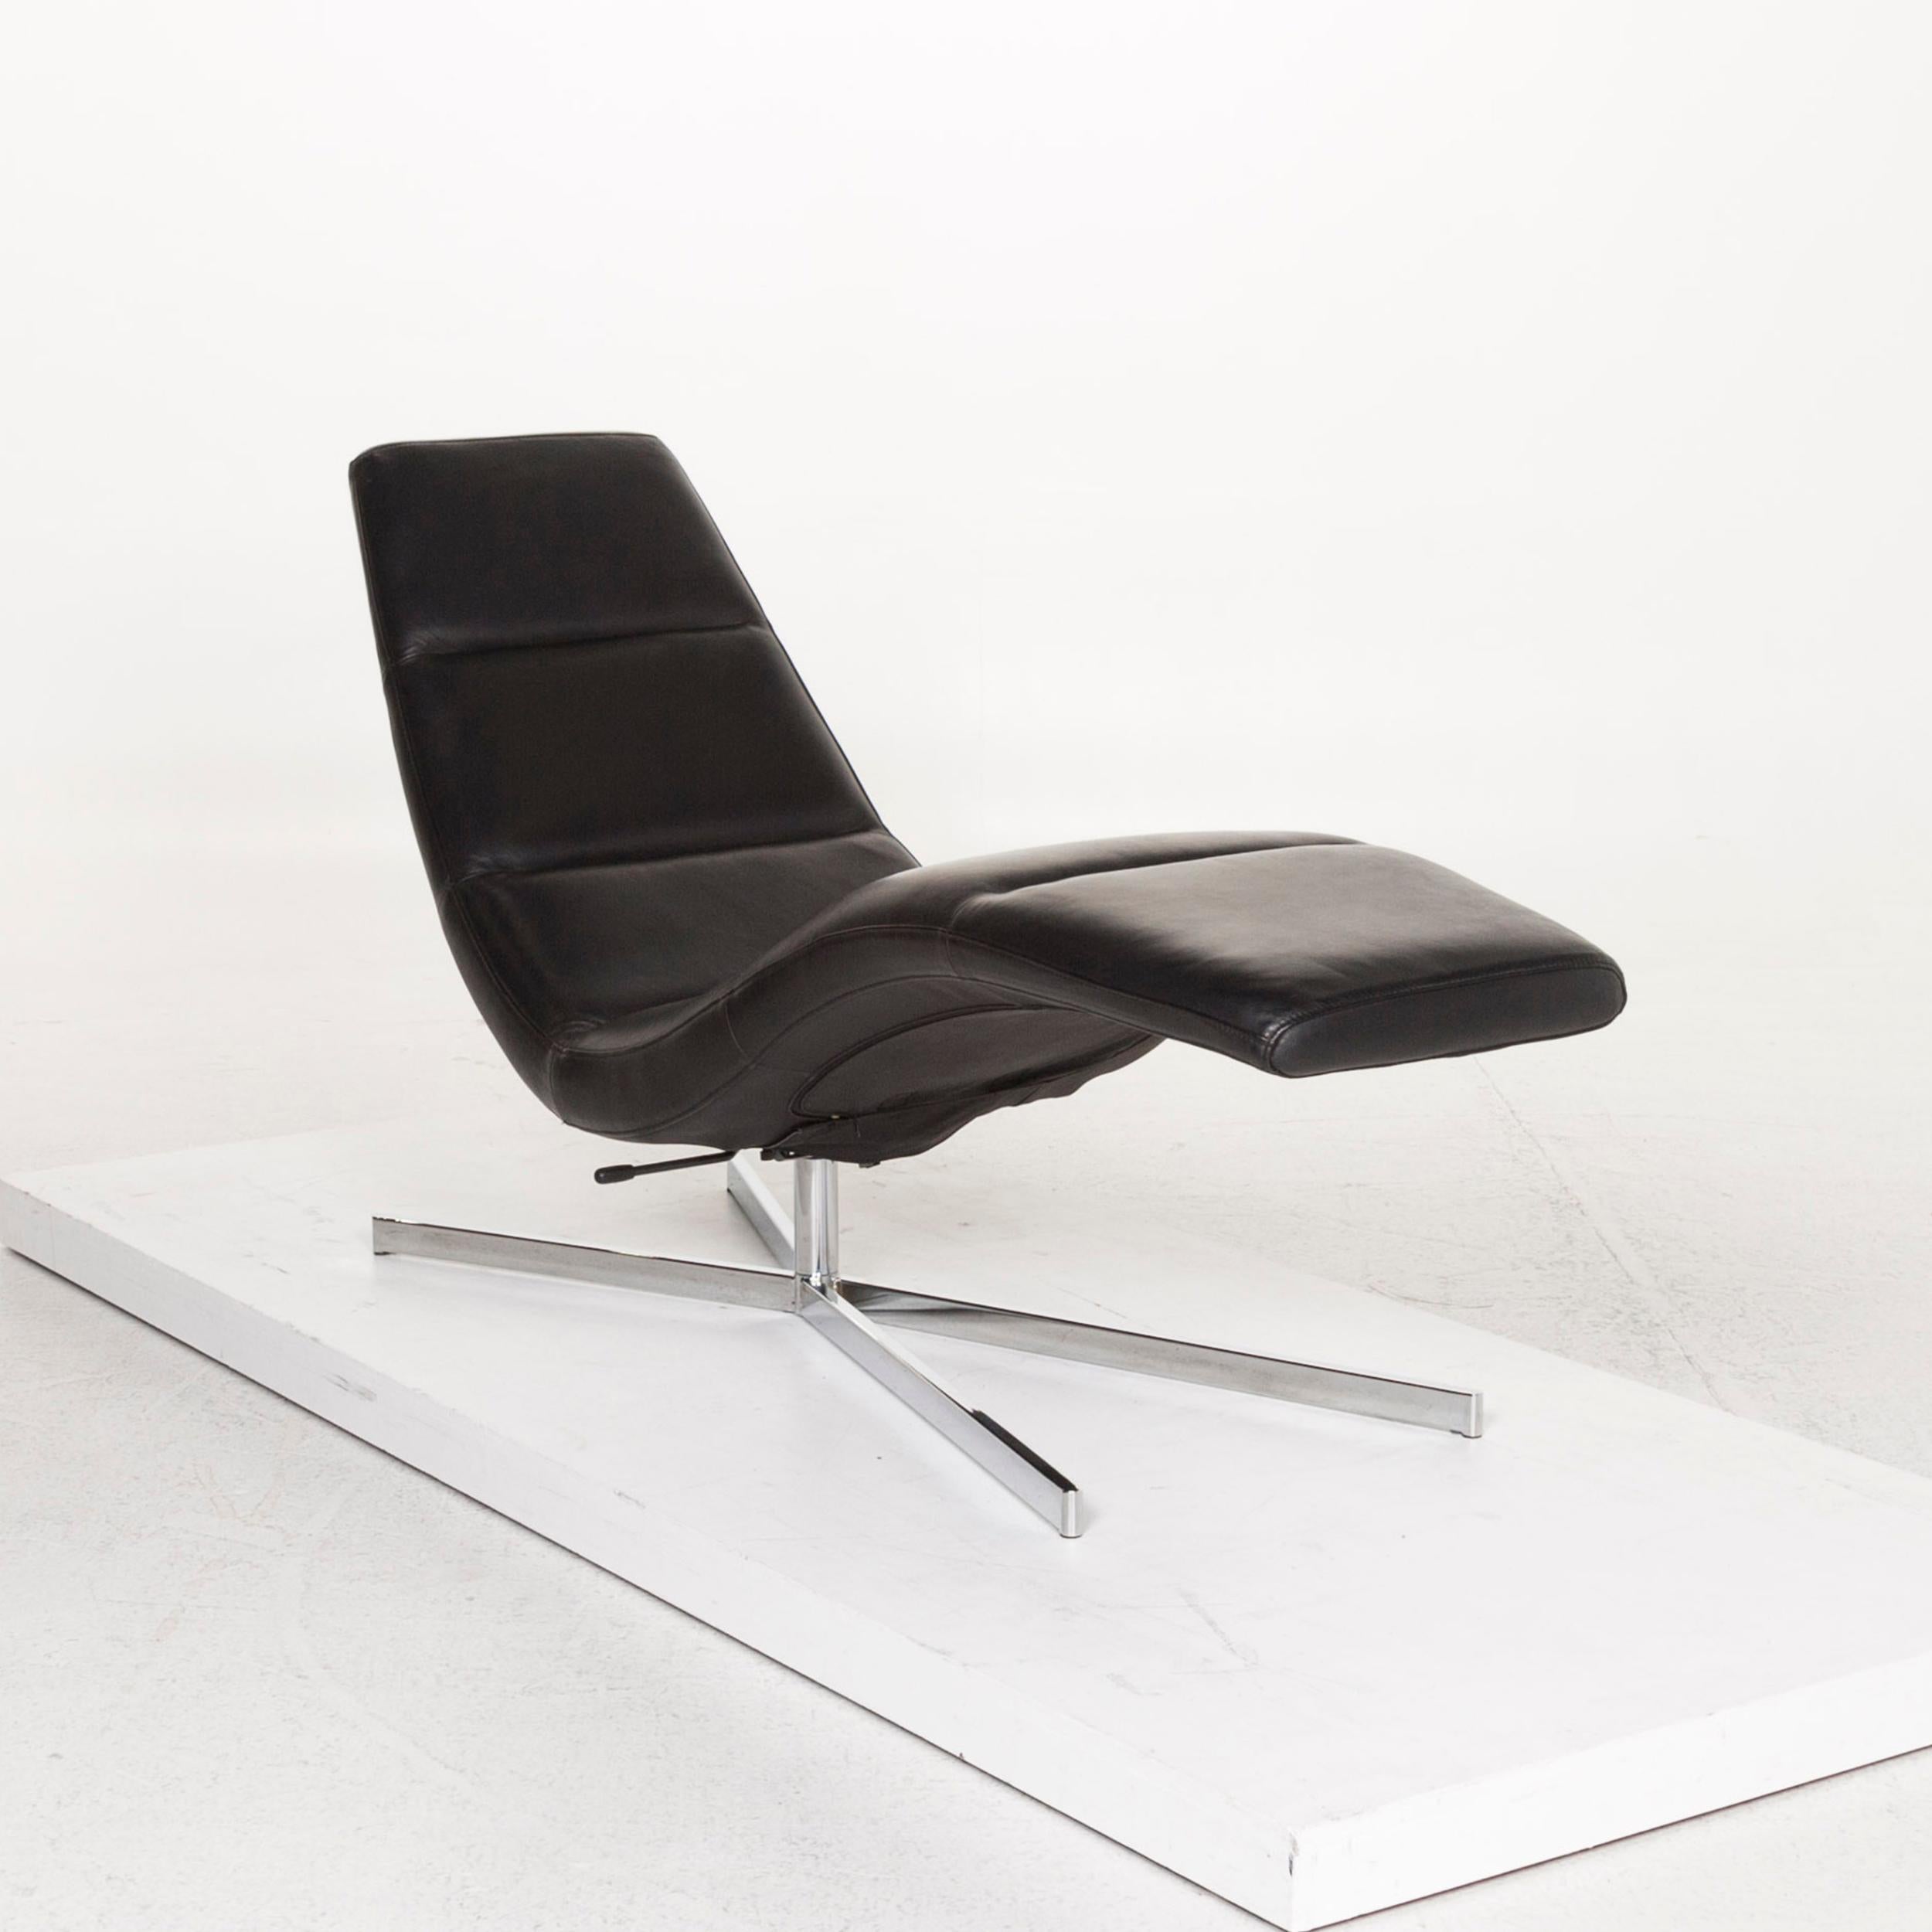 We bring to you a BoConcept leather lounger black relax function function.
  
 

 Product measurements in centimeters:
 

Depth 163
Width 62
Height 104
Seat-height 41
Seat-depth 107
Seat-width 60
Back-height 65.

       